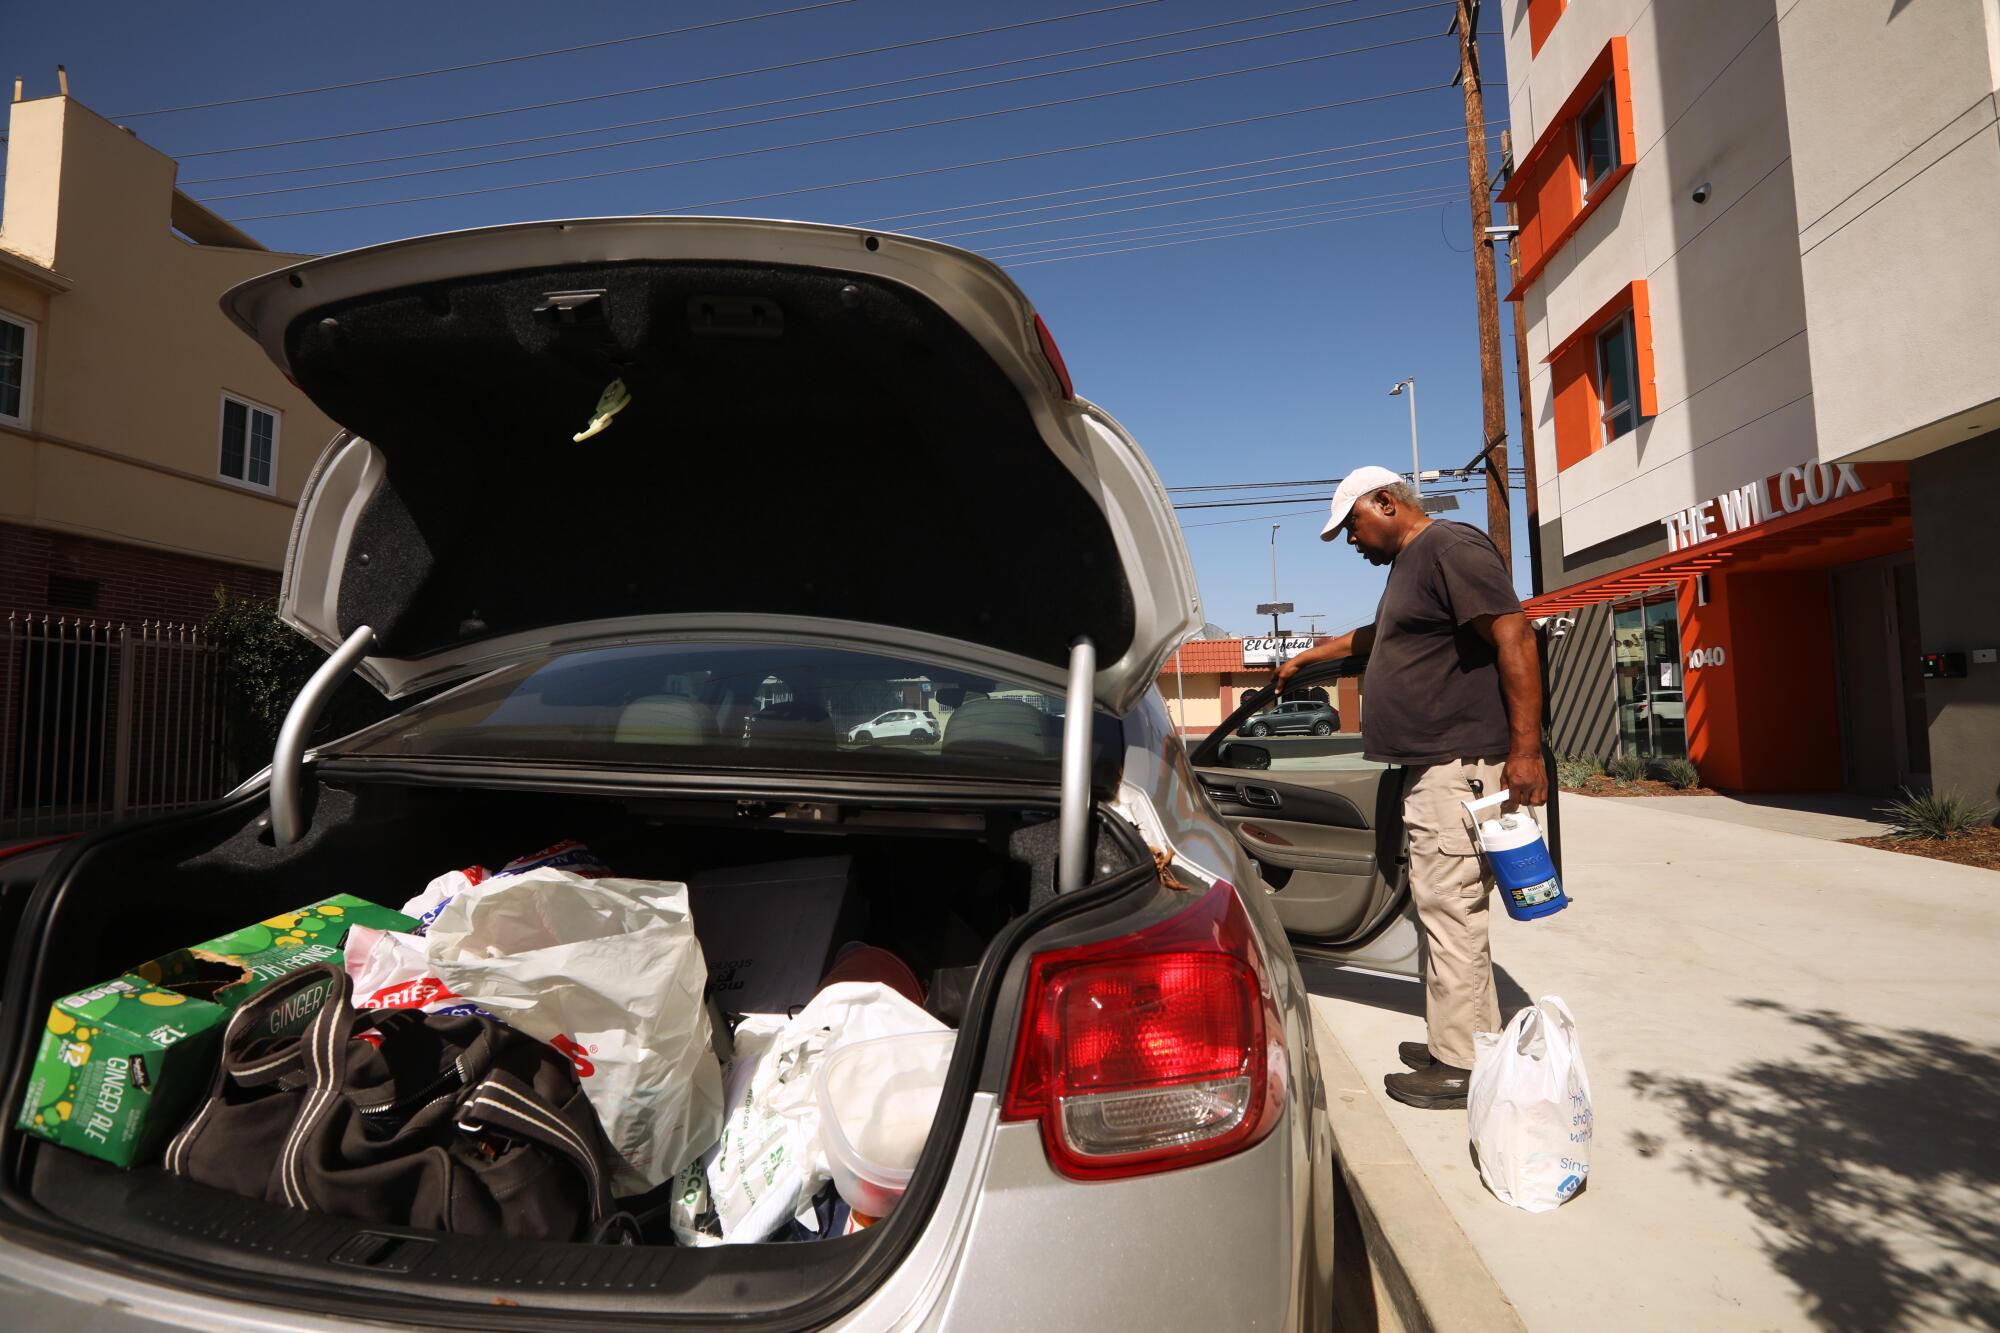 A man moves belongings from the trunk of his car to his new apartment unit.  